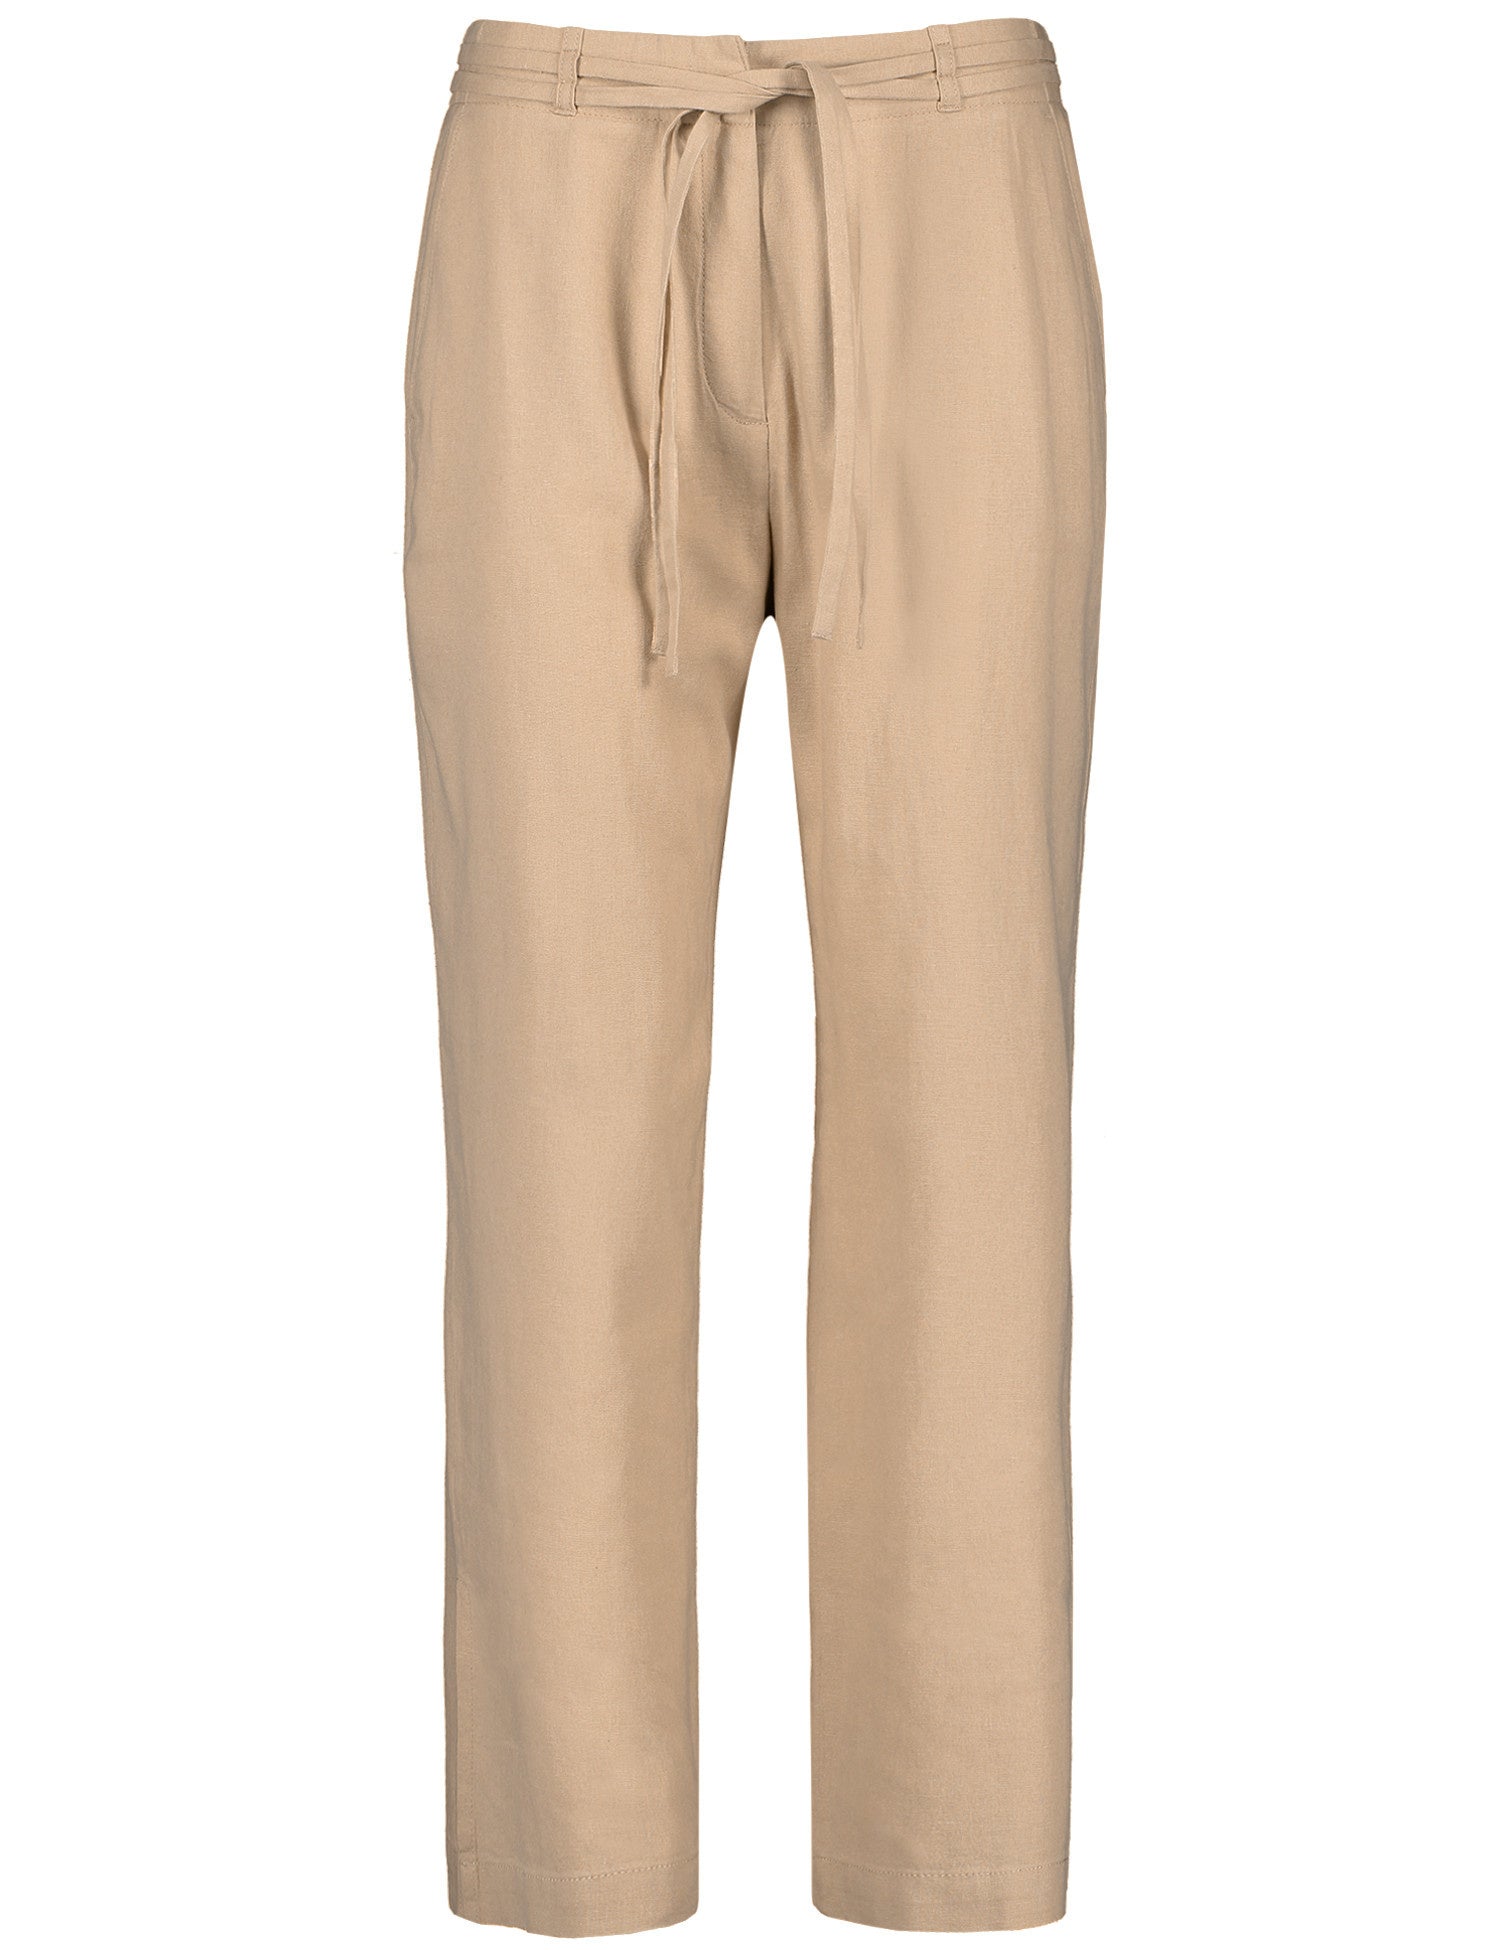 Linen Blend Trousers With A 3/4-Length, Wide Leg